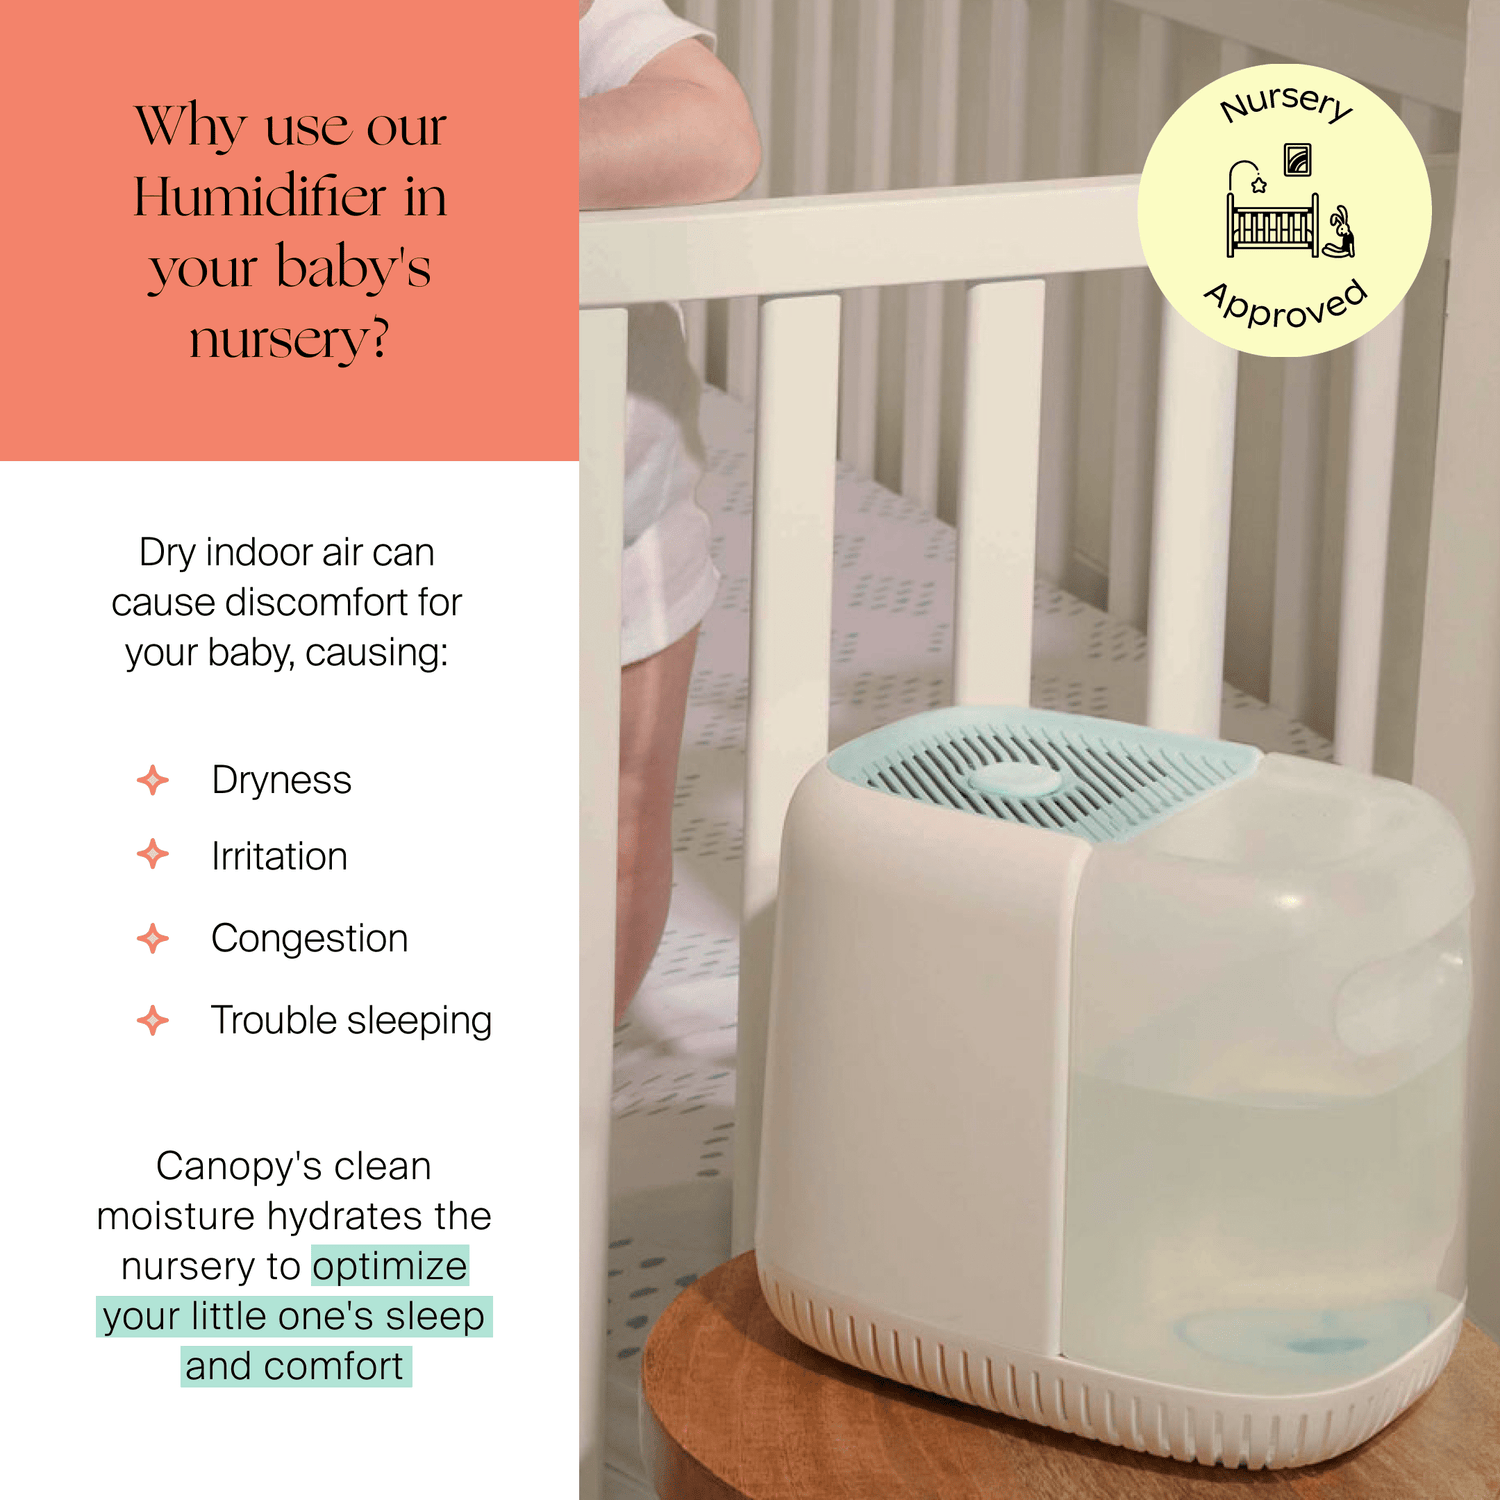 Nursery Humidifier | Lifestyle, why use our humidifier in your baby's nursery